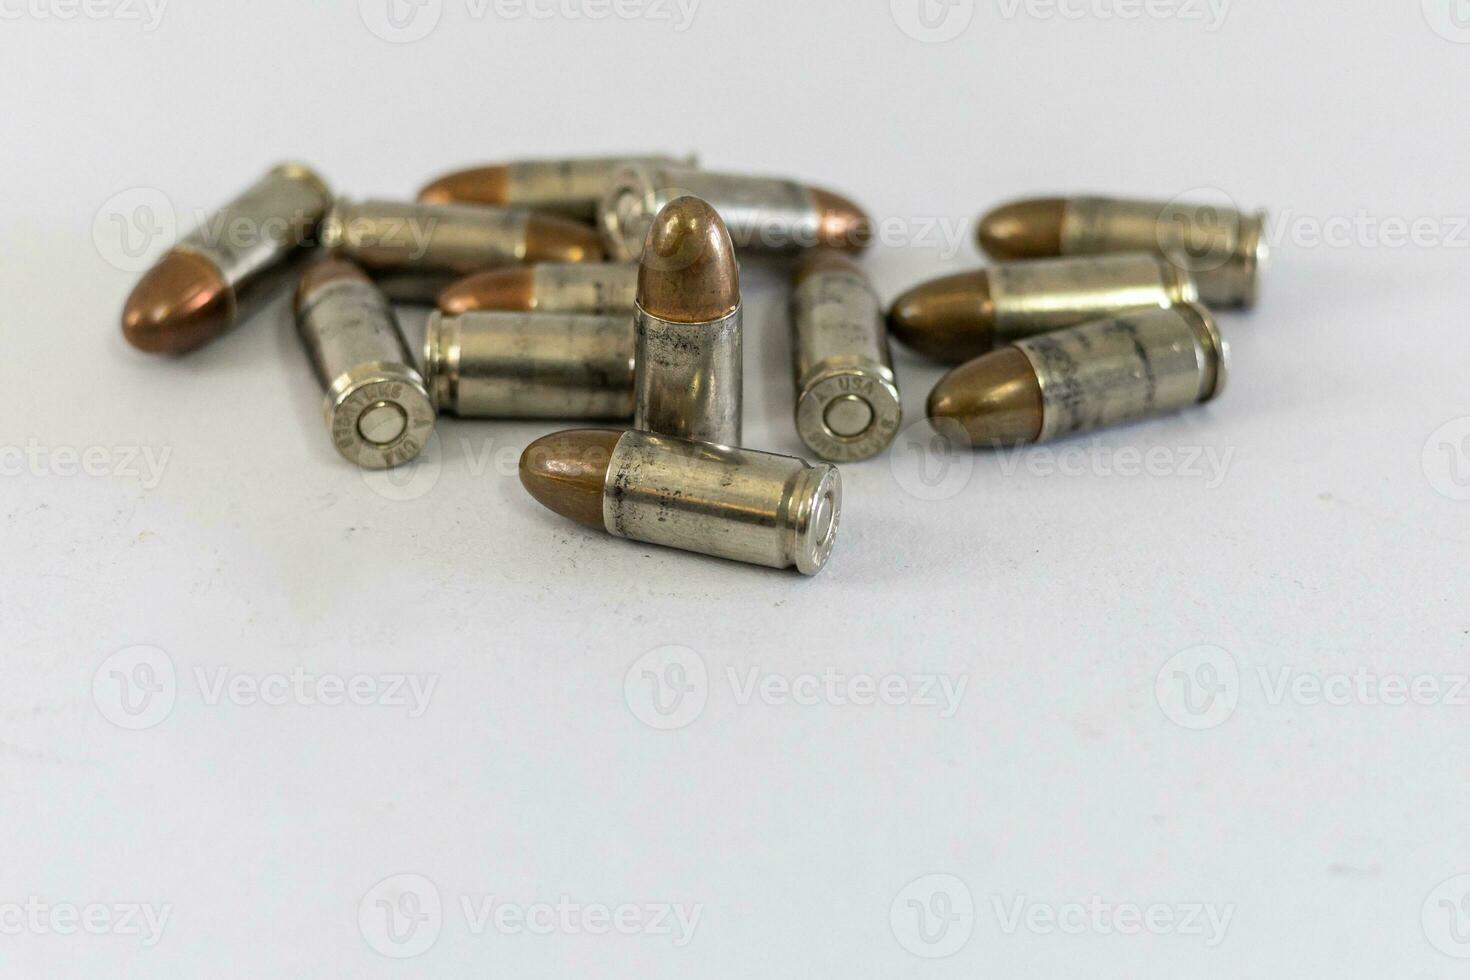 Pile of golden 9mm pistol bullets on a white background photo